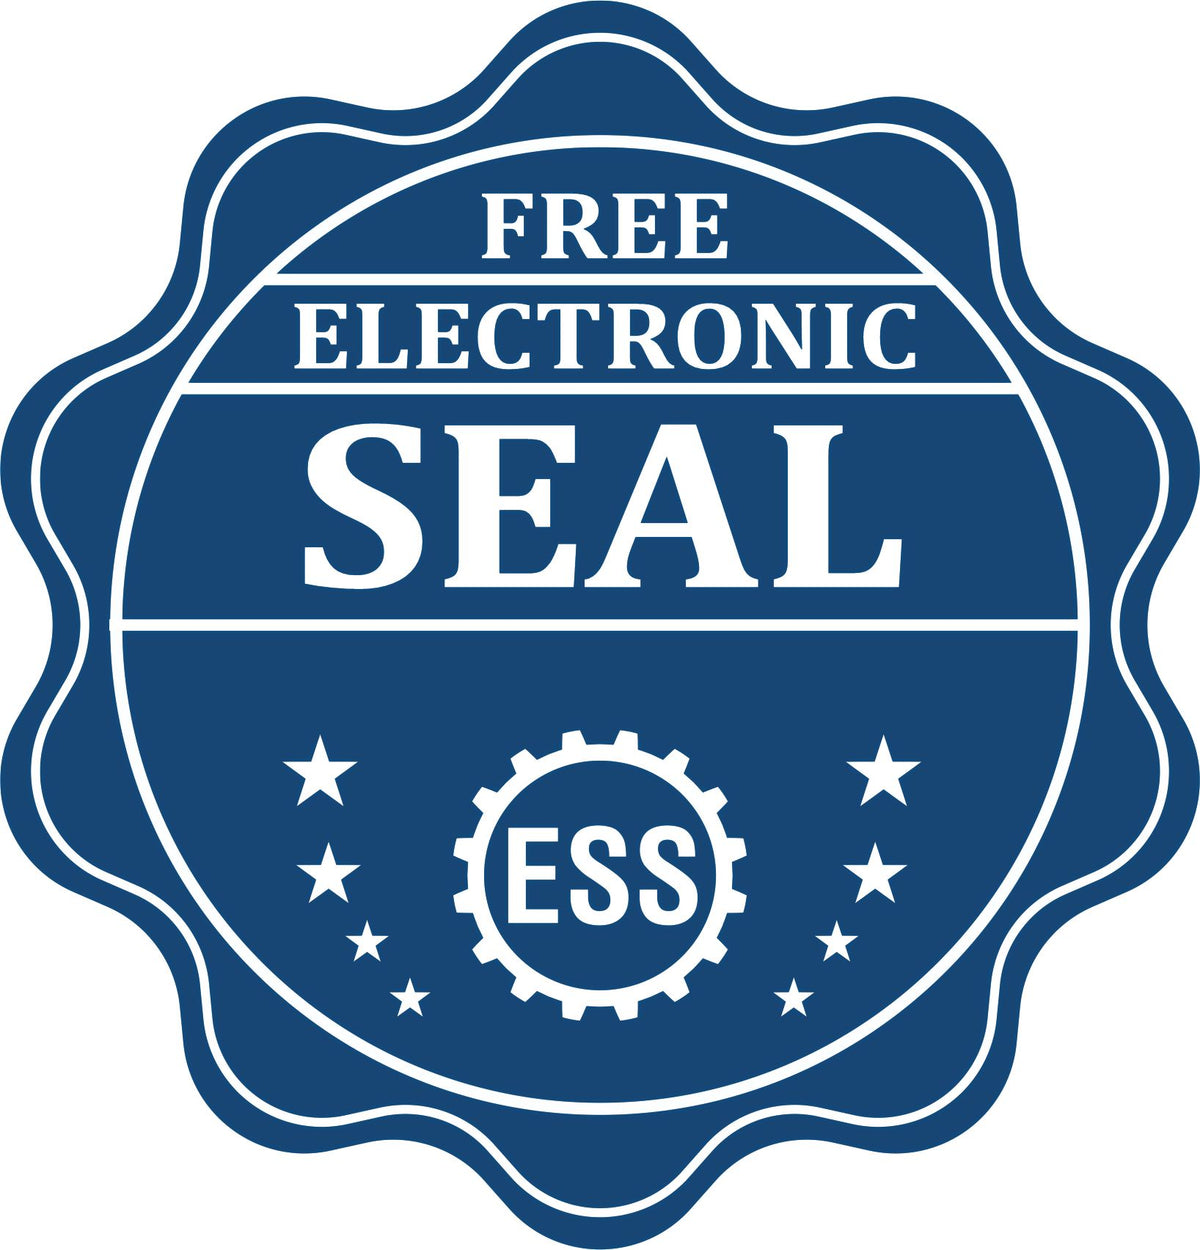 A badge showing a free electronic seal for the Soft Pocket Idaho Landscape Architect Embosser with stars and the ESS gear on the emblem.